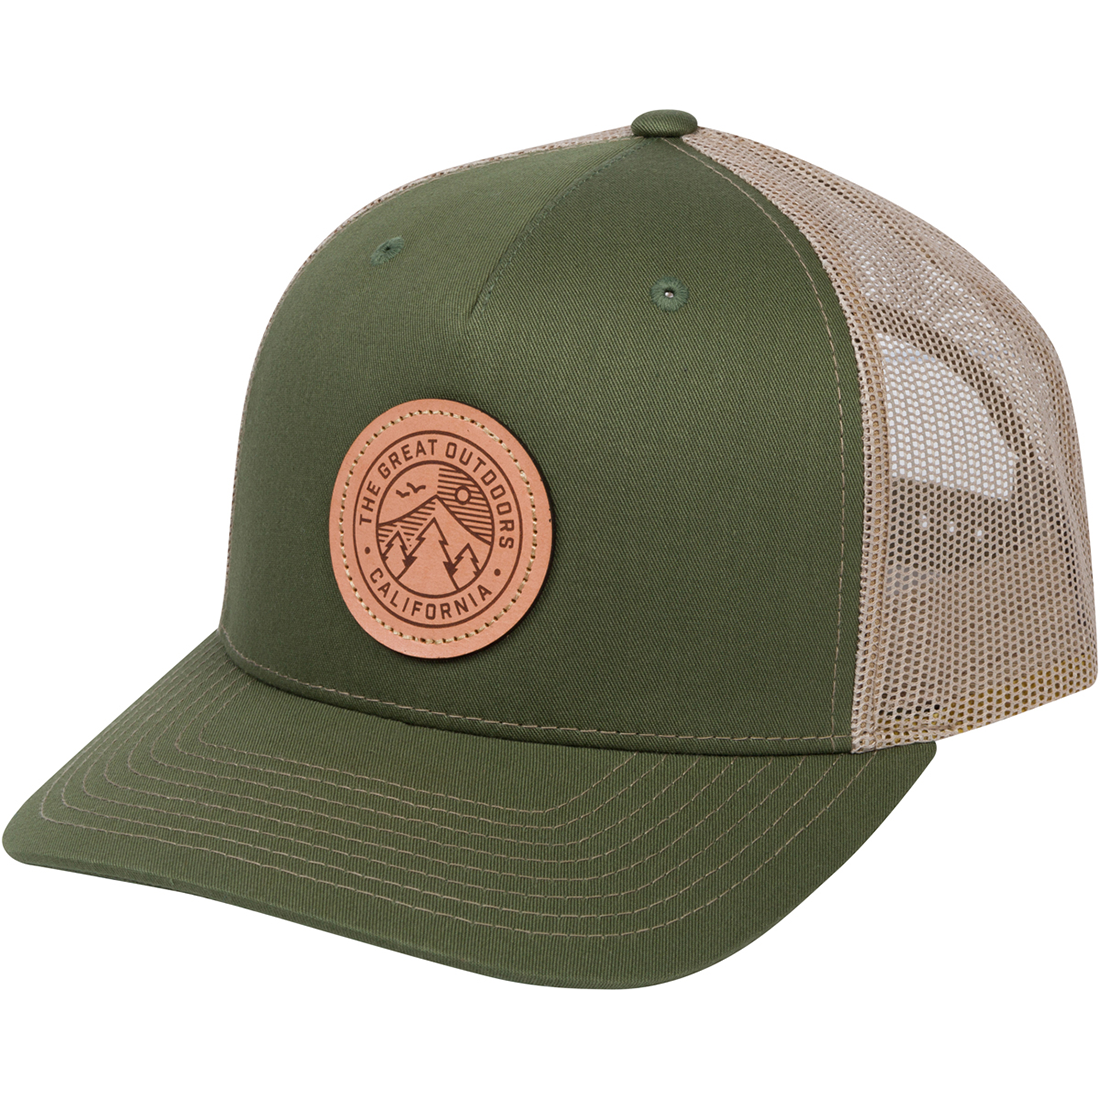 California Great Outdoors Snapback Trucker Hat With Leather Patch